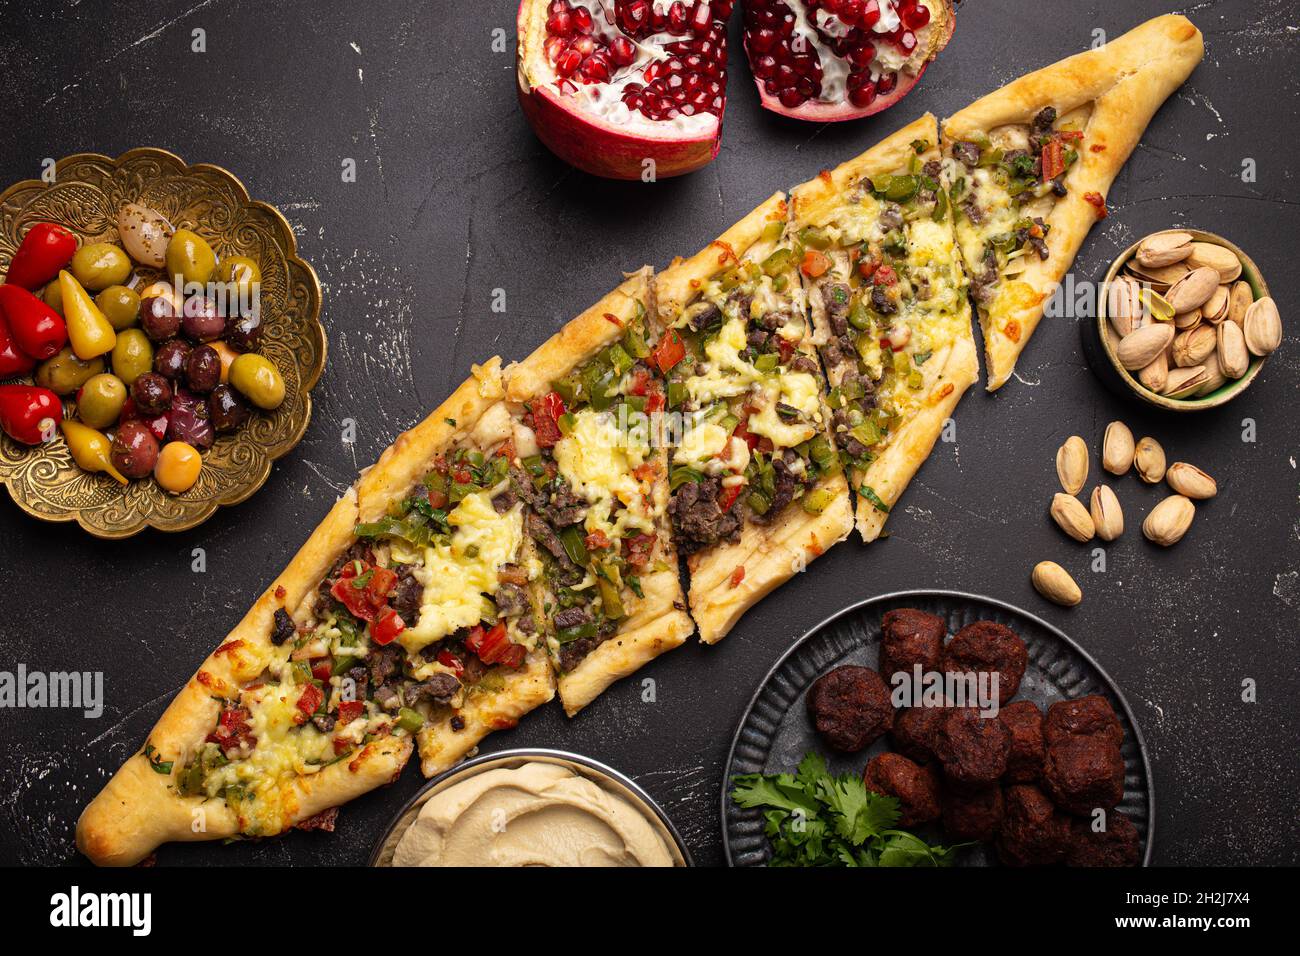 Turkish pizza pide from above Stock Photo